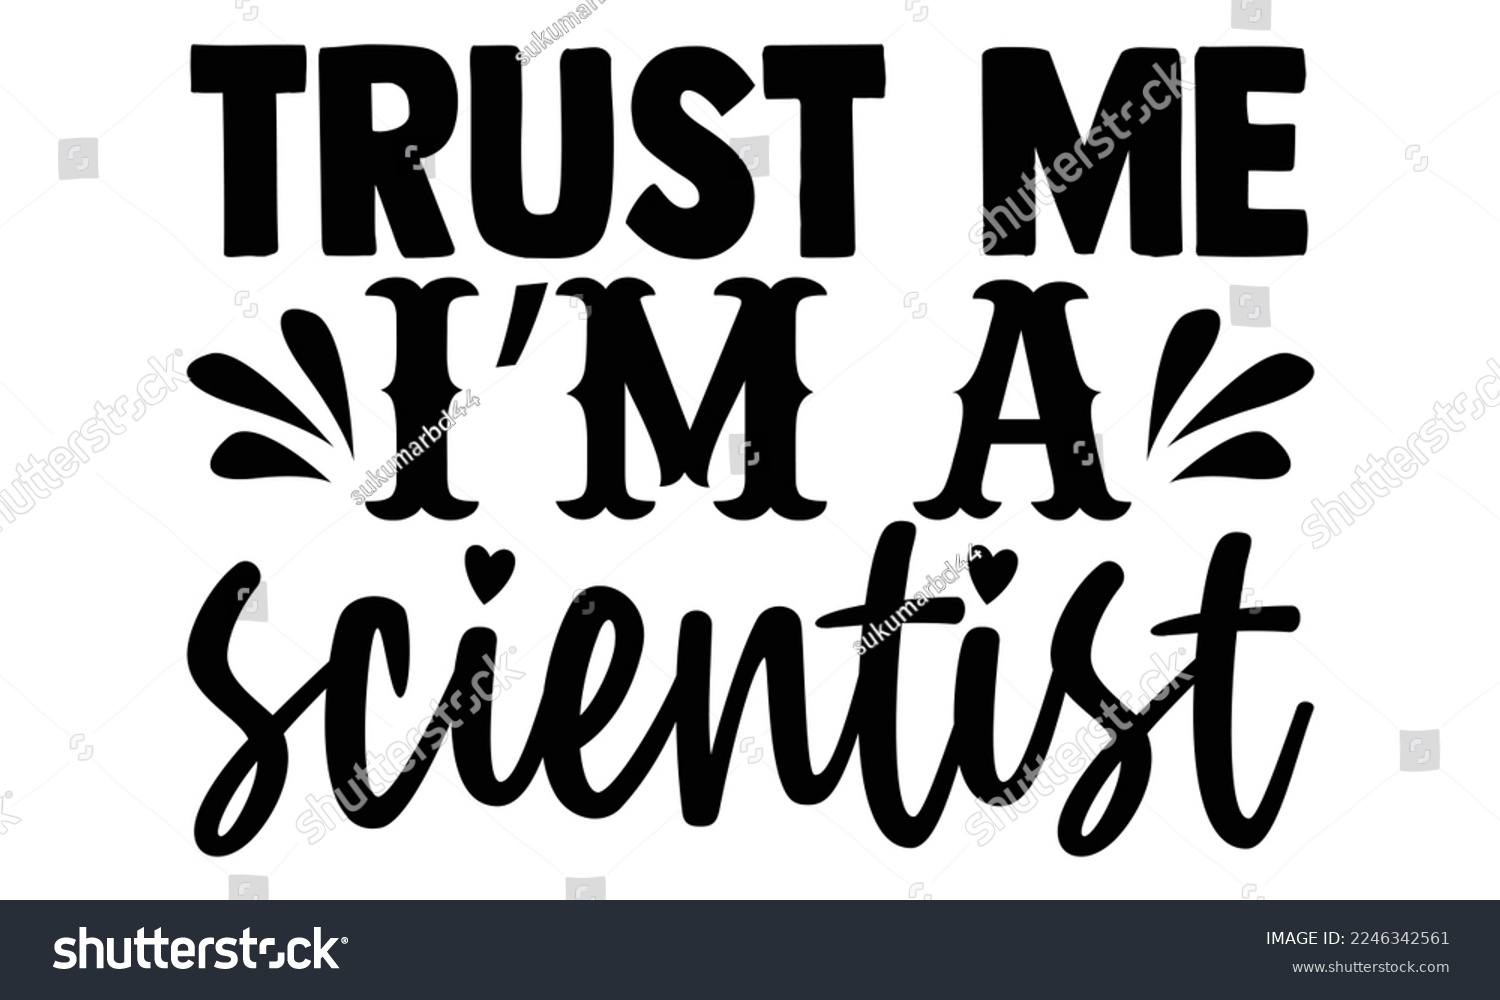 SVG of Trust Me I’m A Scientist - Scientist t shirt design, Hand drawn lettering phrase isolated on white background, Calligraphy quotes design, SVG Files for Cutting, bag, cups, card svg